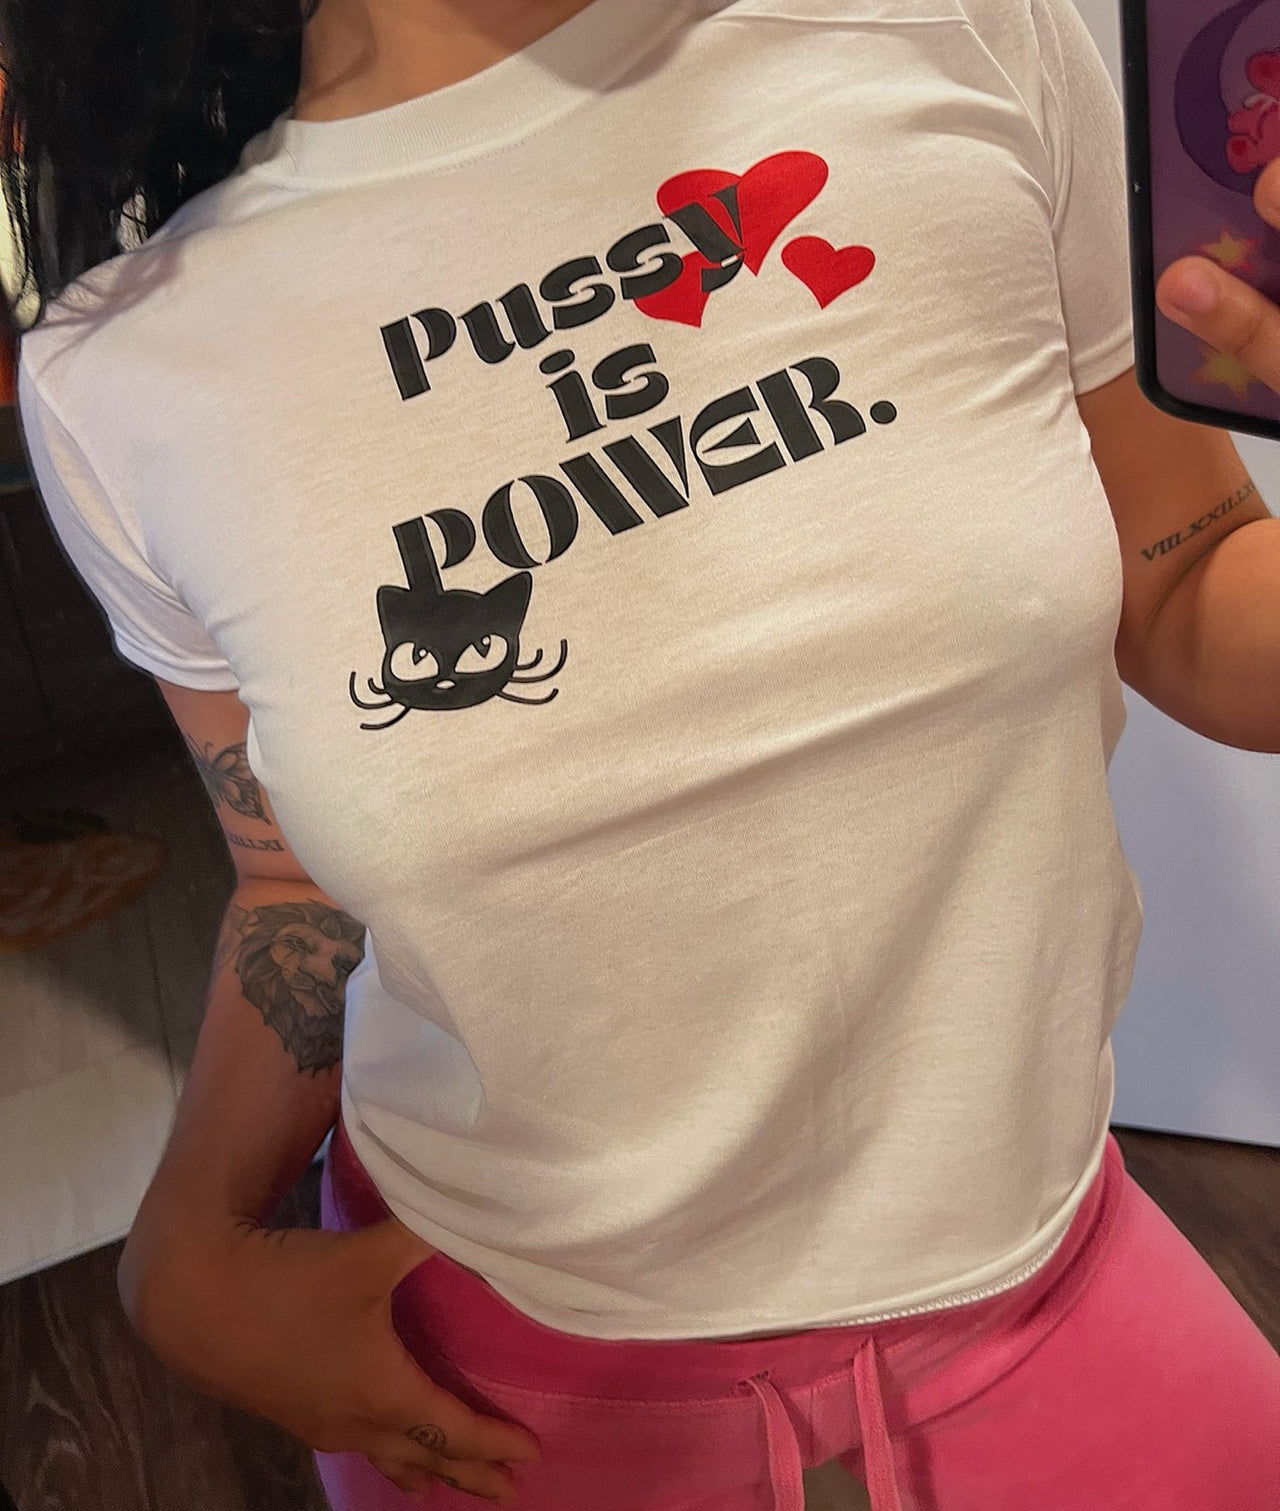 Pussy is Power tee